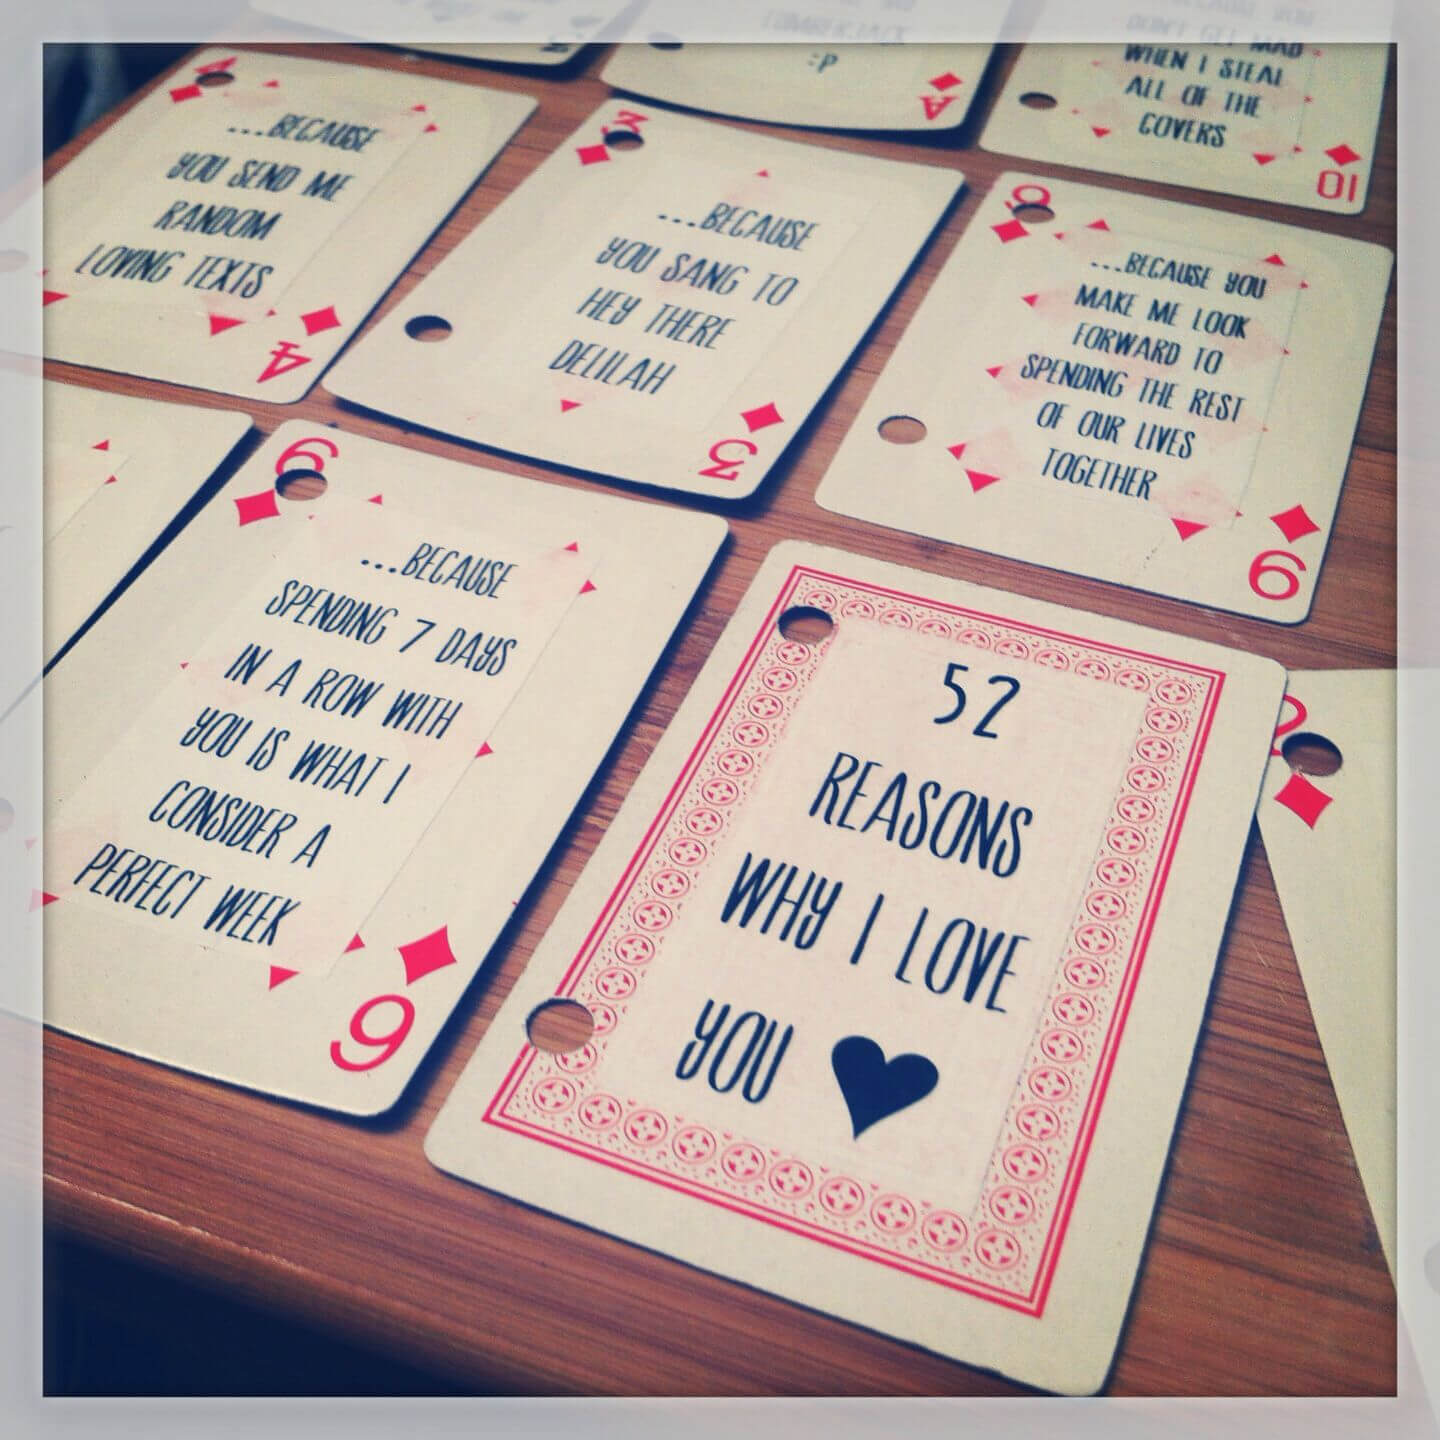 Diy 52 Things I Love About You Deck Cards Gift | Cards For With Regard To 52 Reasons Why I Love You Cards Templates Free